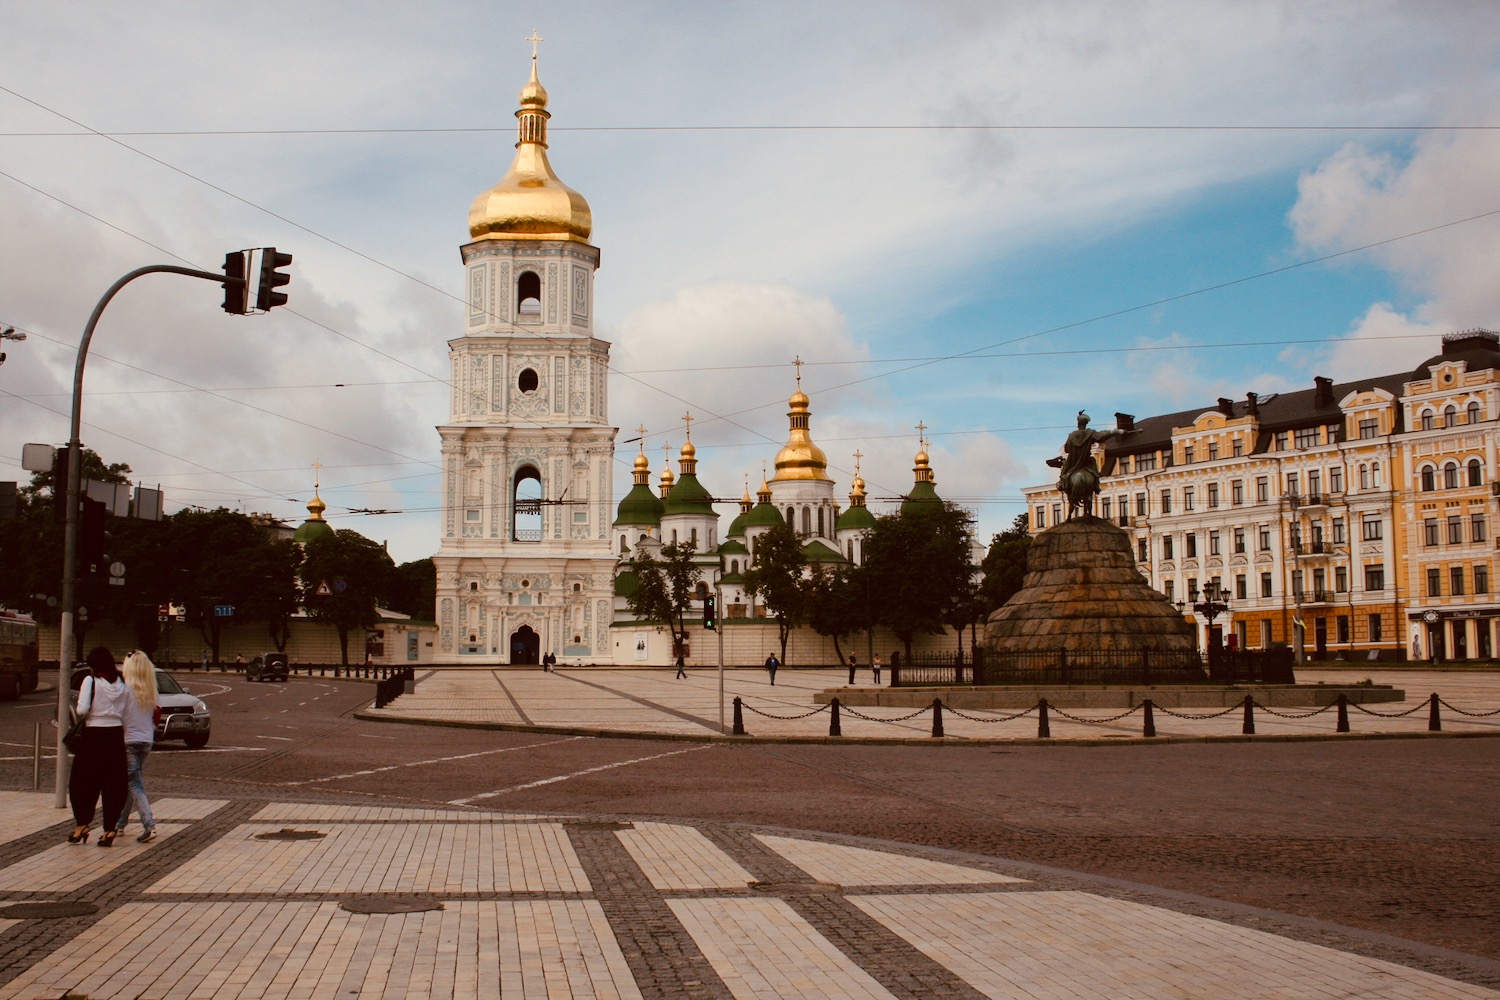 a large white building with gold domes